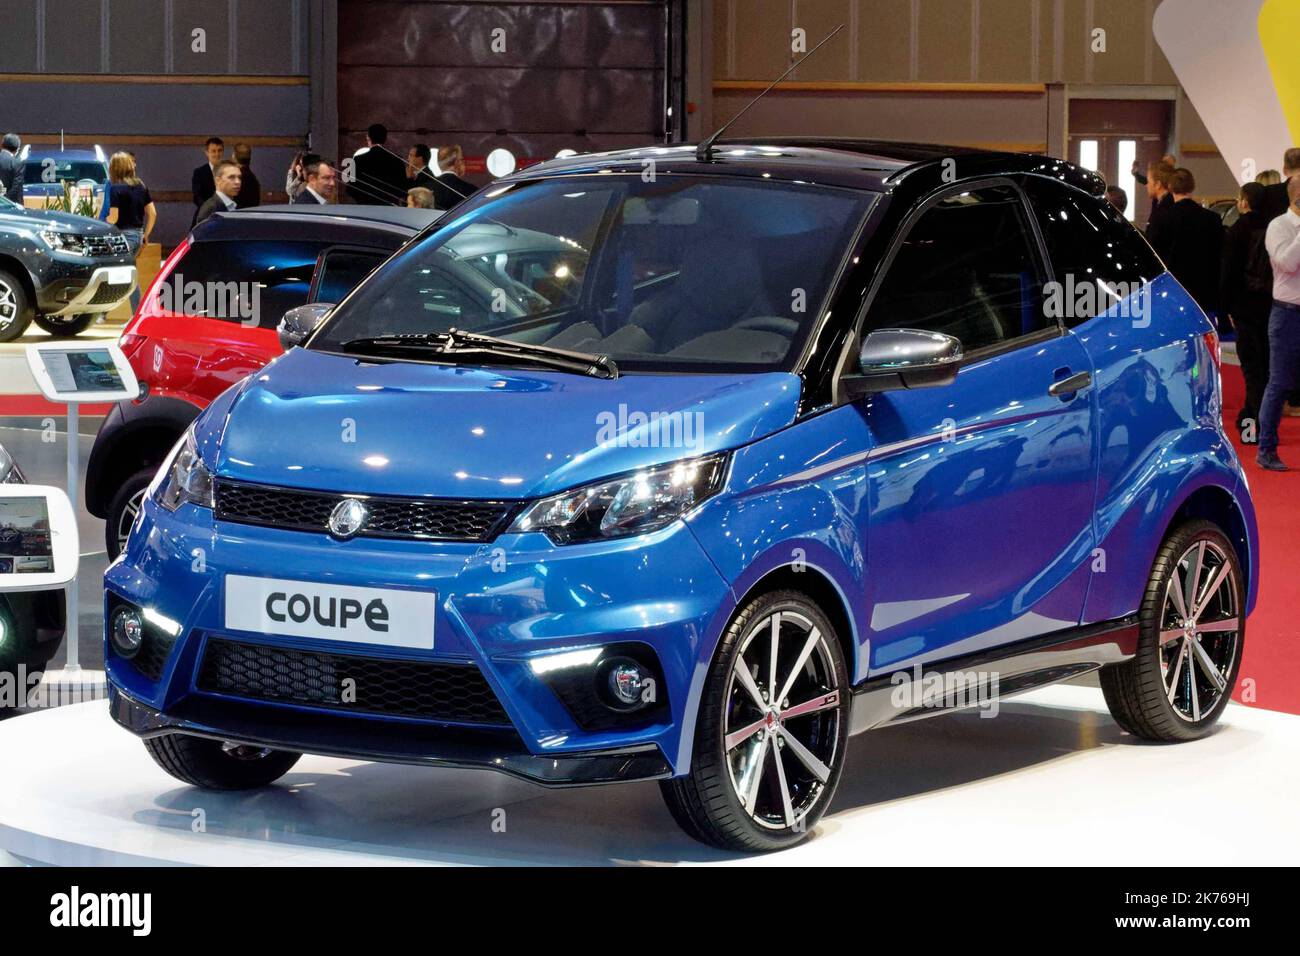 Aixam. Coupe. Paris Motor Show, international fair takes place from October 4th to 14th 2018 Stock Photo